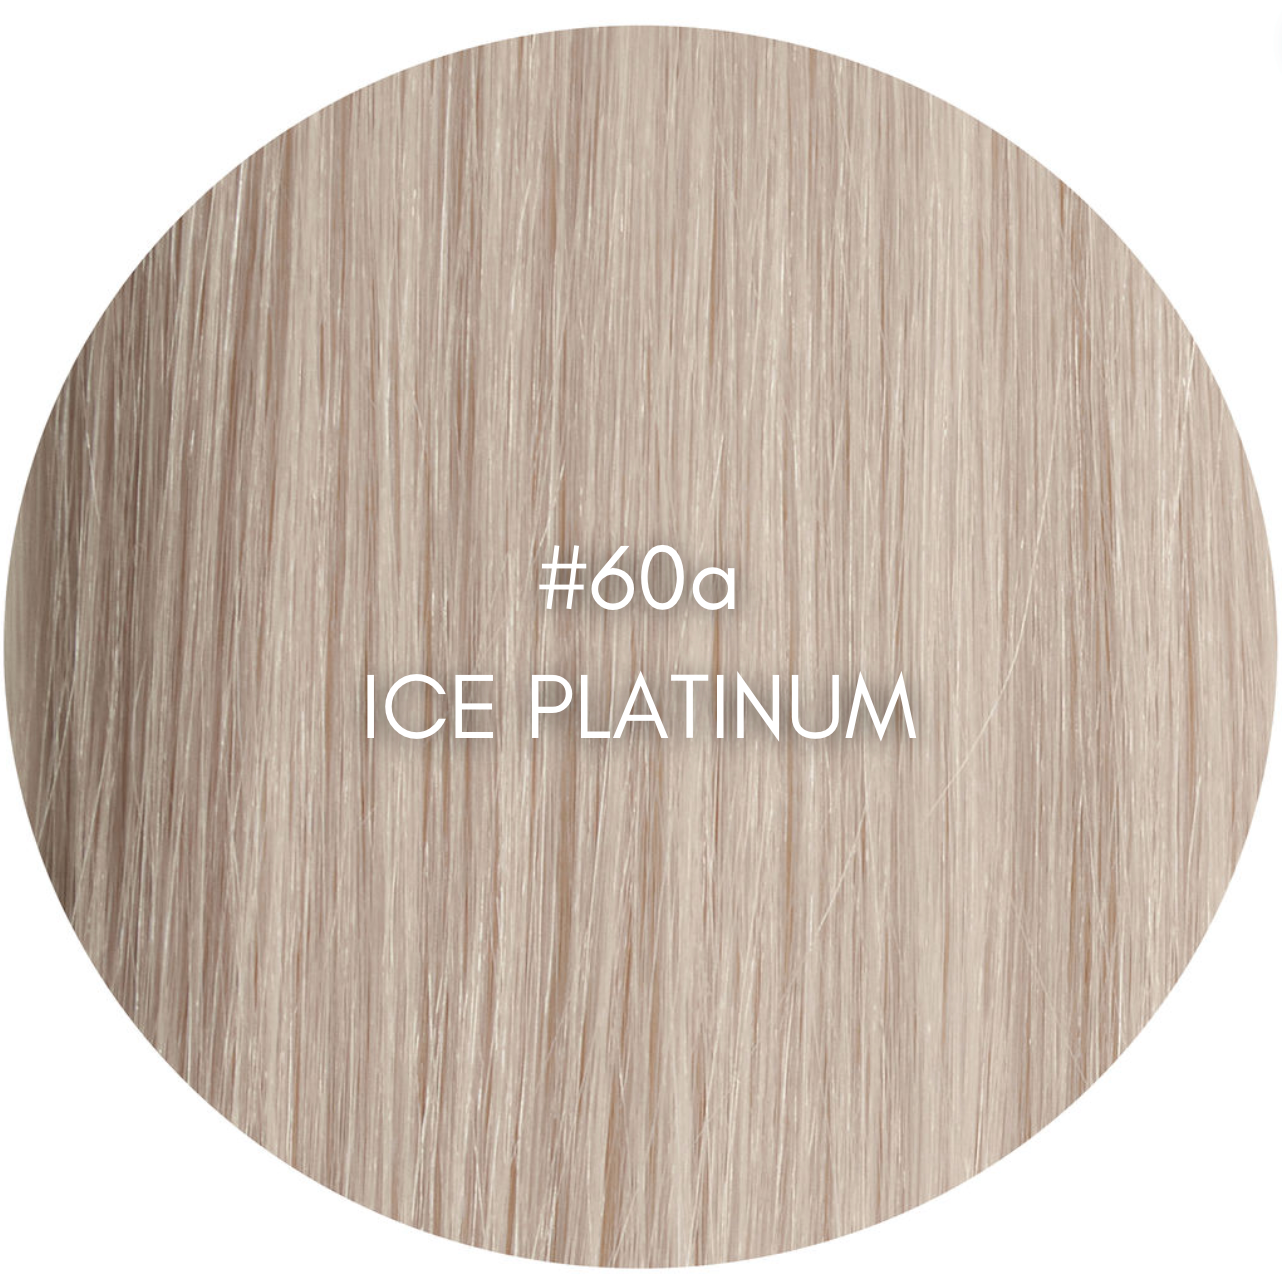 Invisi wefts - RETAIL